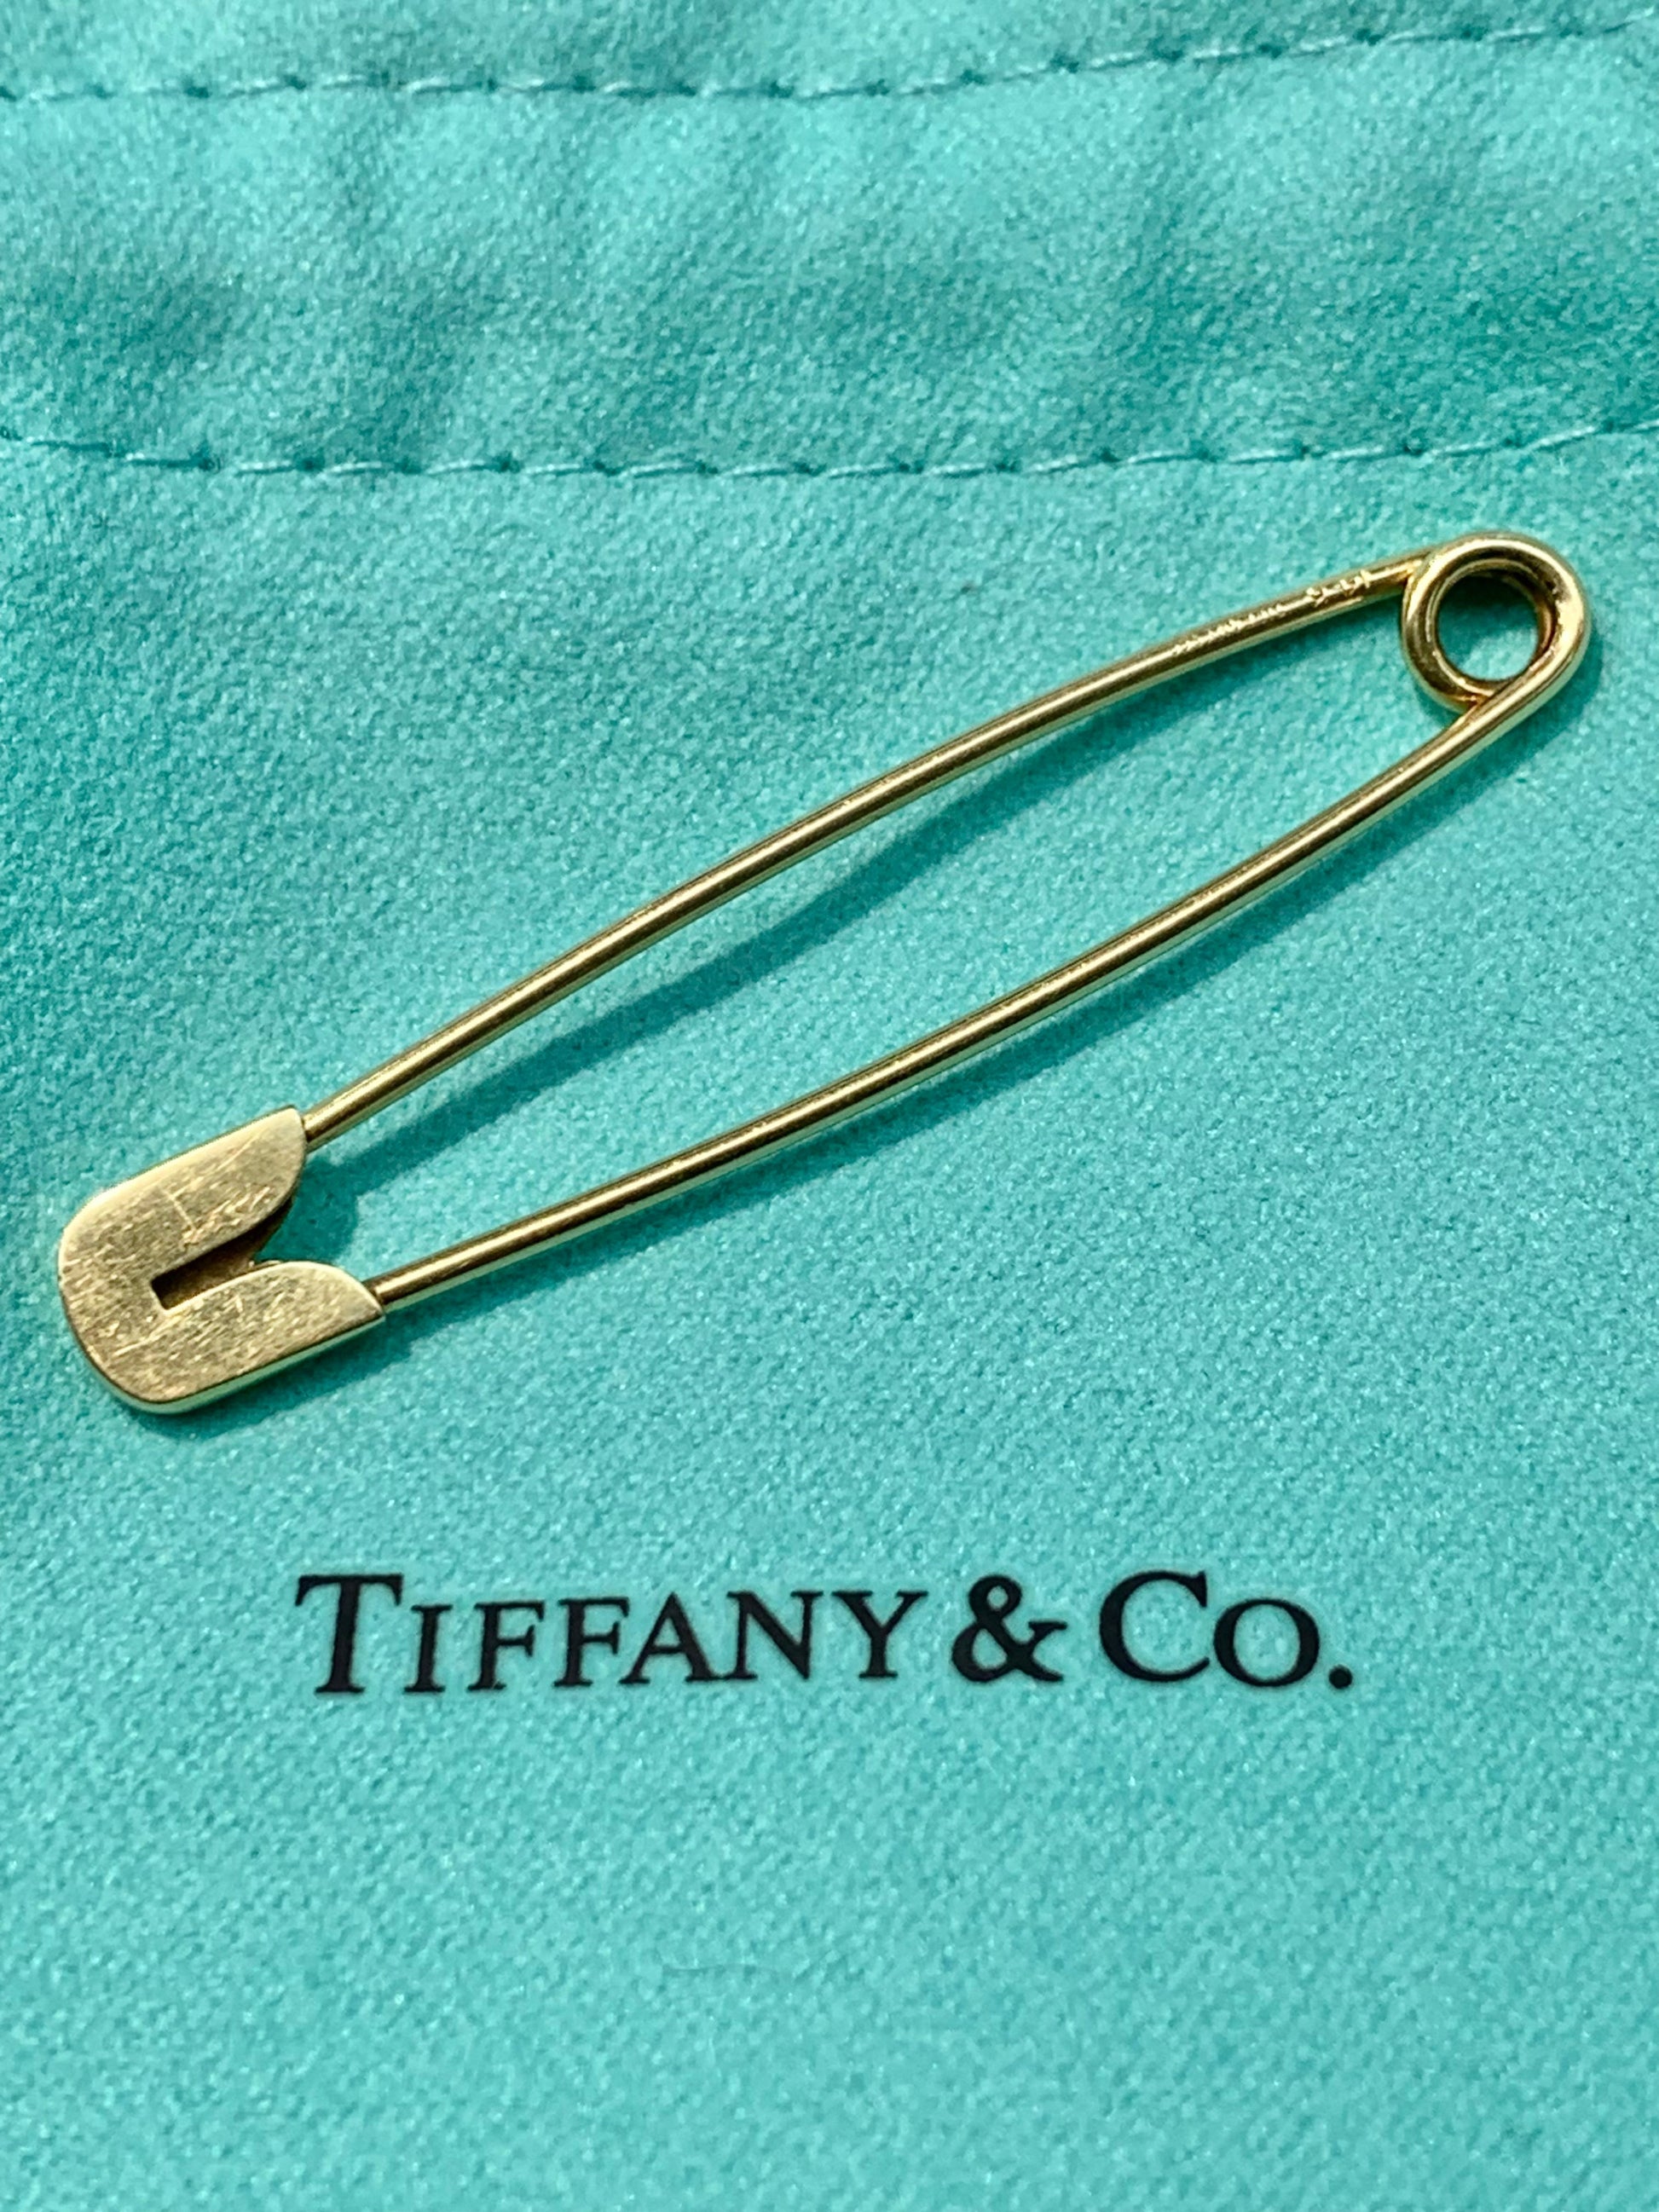 Pin on tyfany